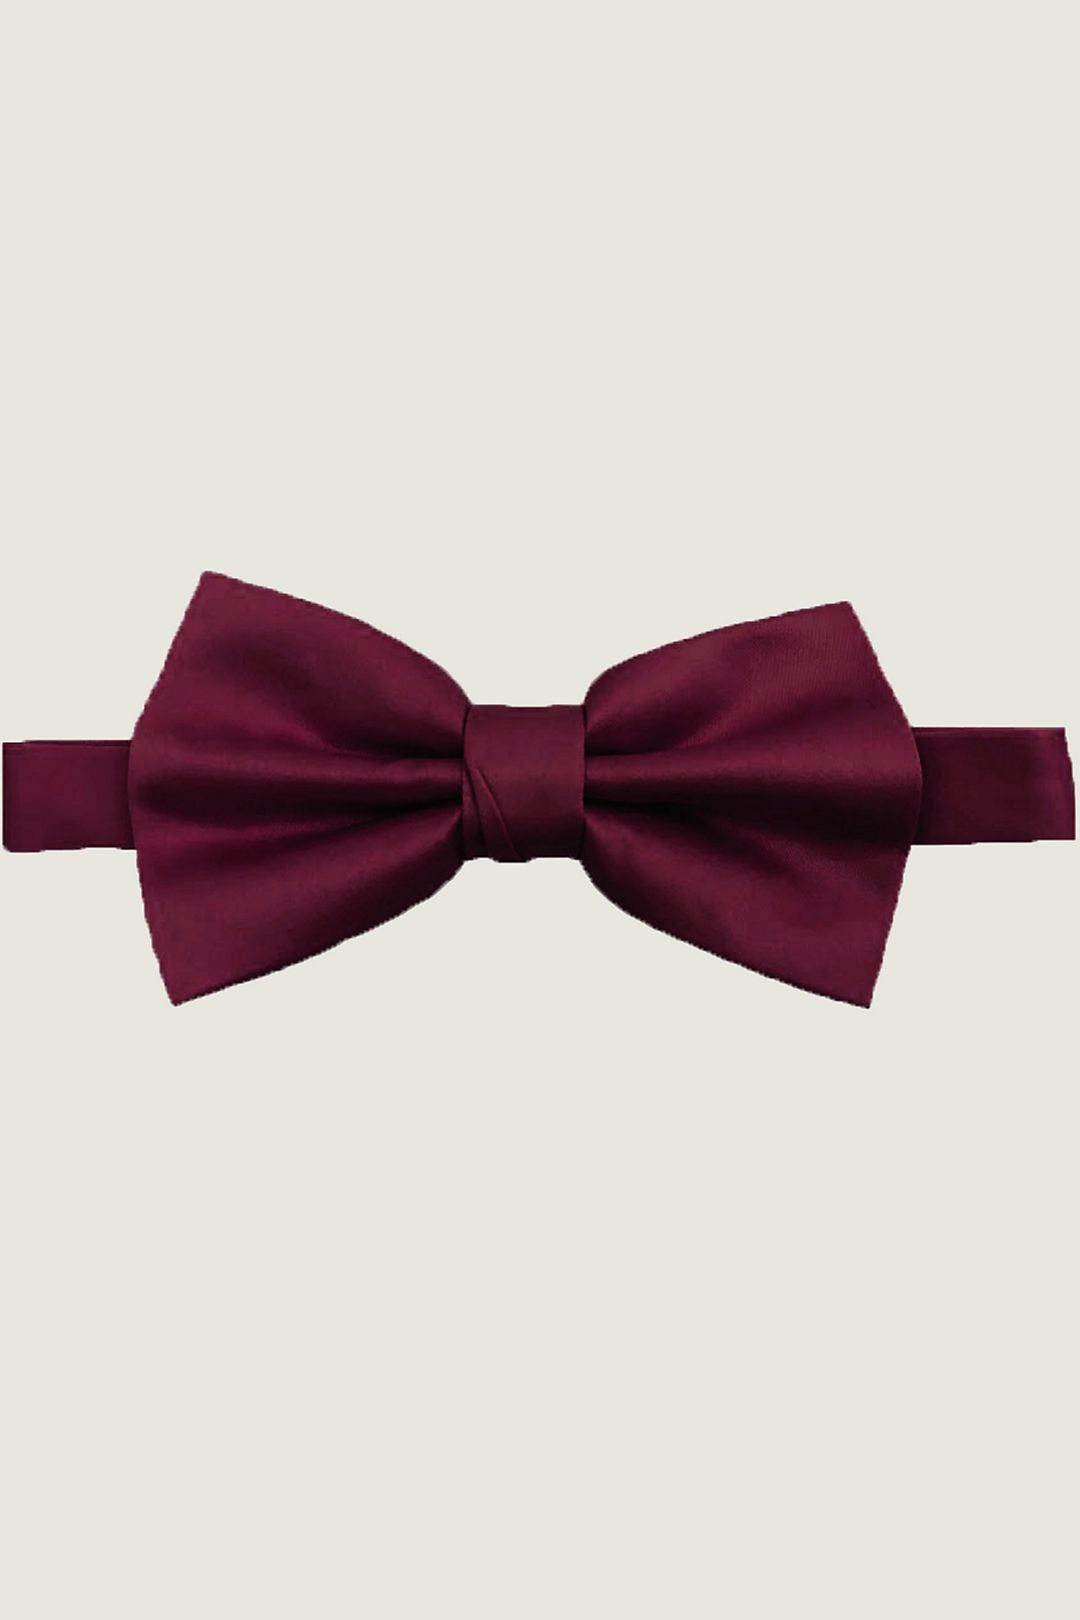 Matte Satin Bow Tie with Adjustable Band Image 1